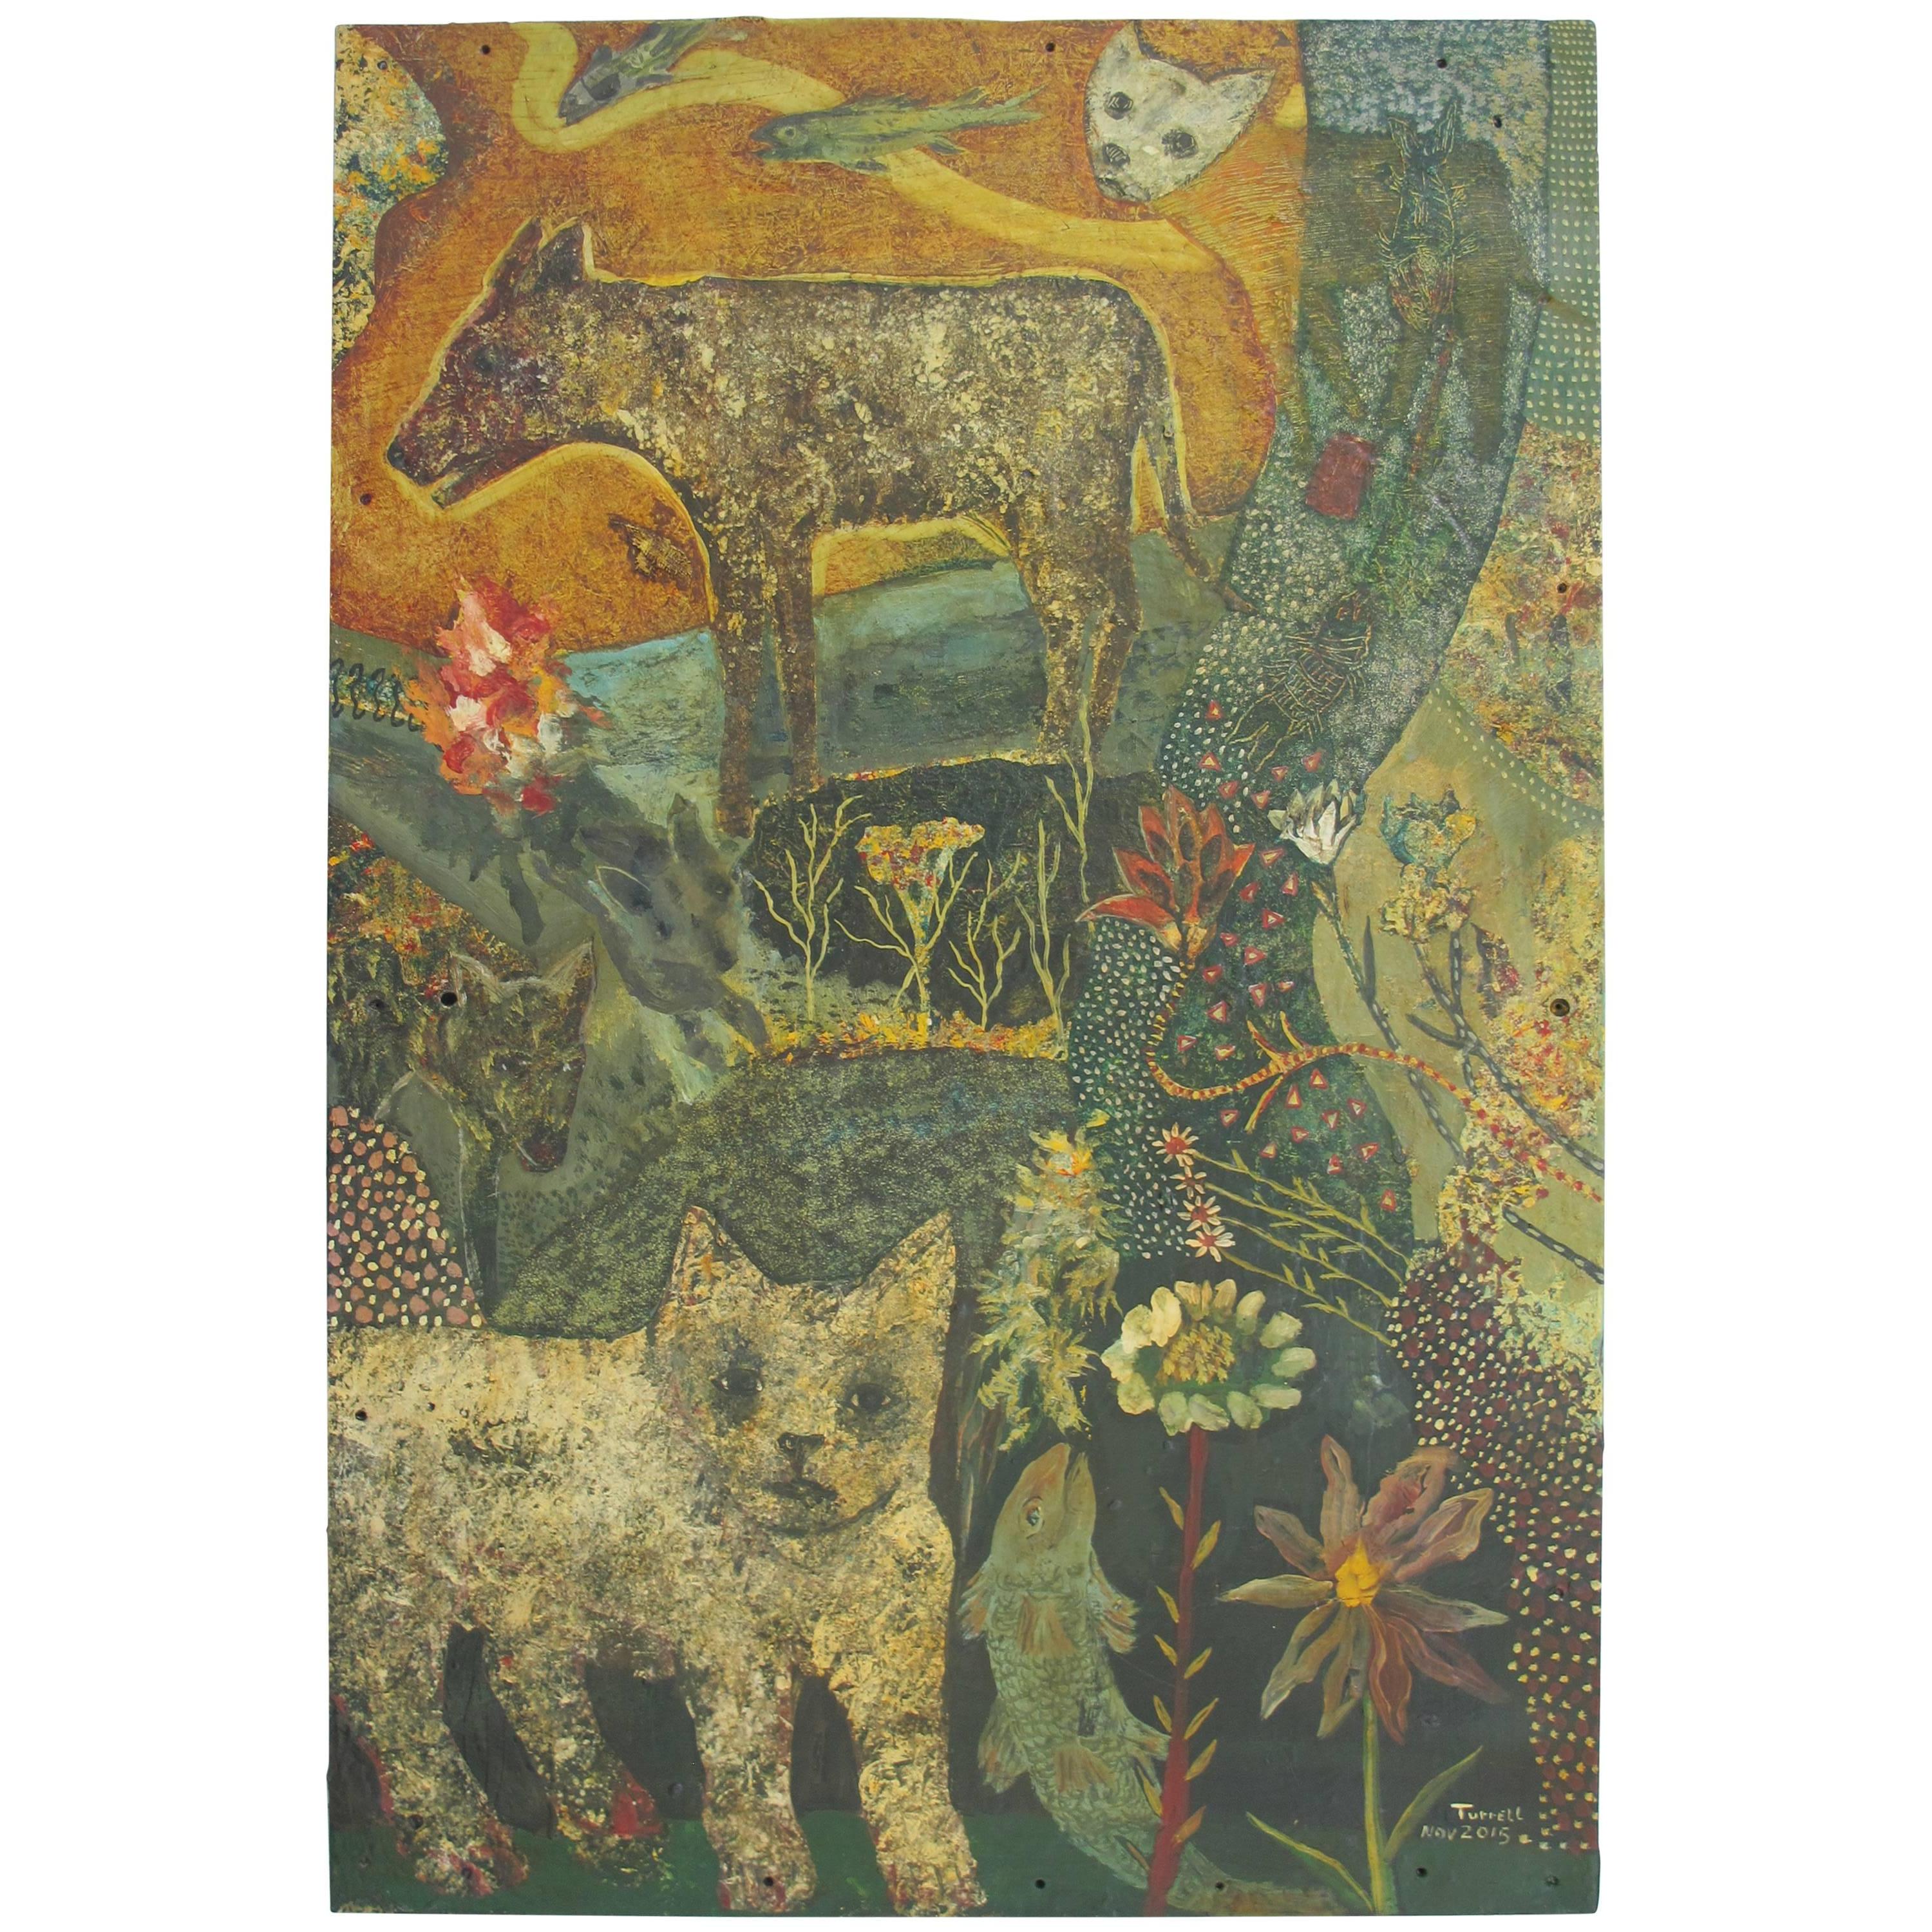 "Wonderland" Painting with Dogs by Terry Turrell For Sale